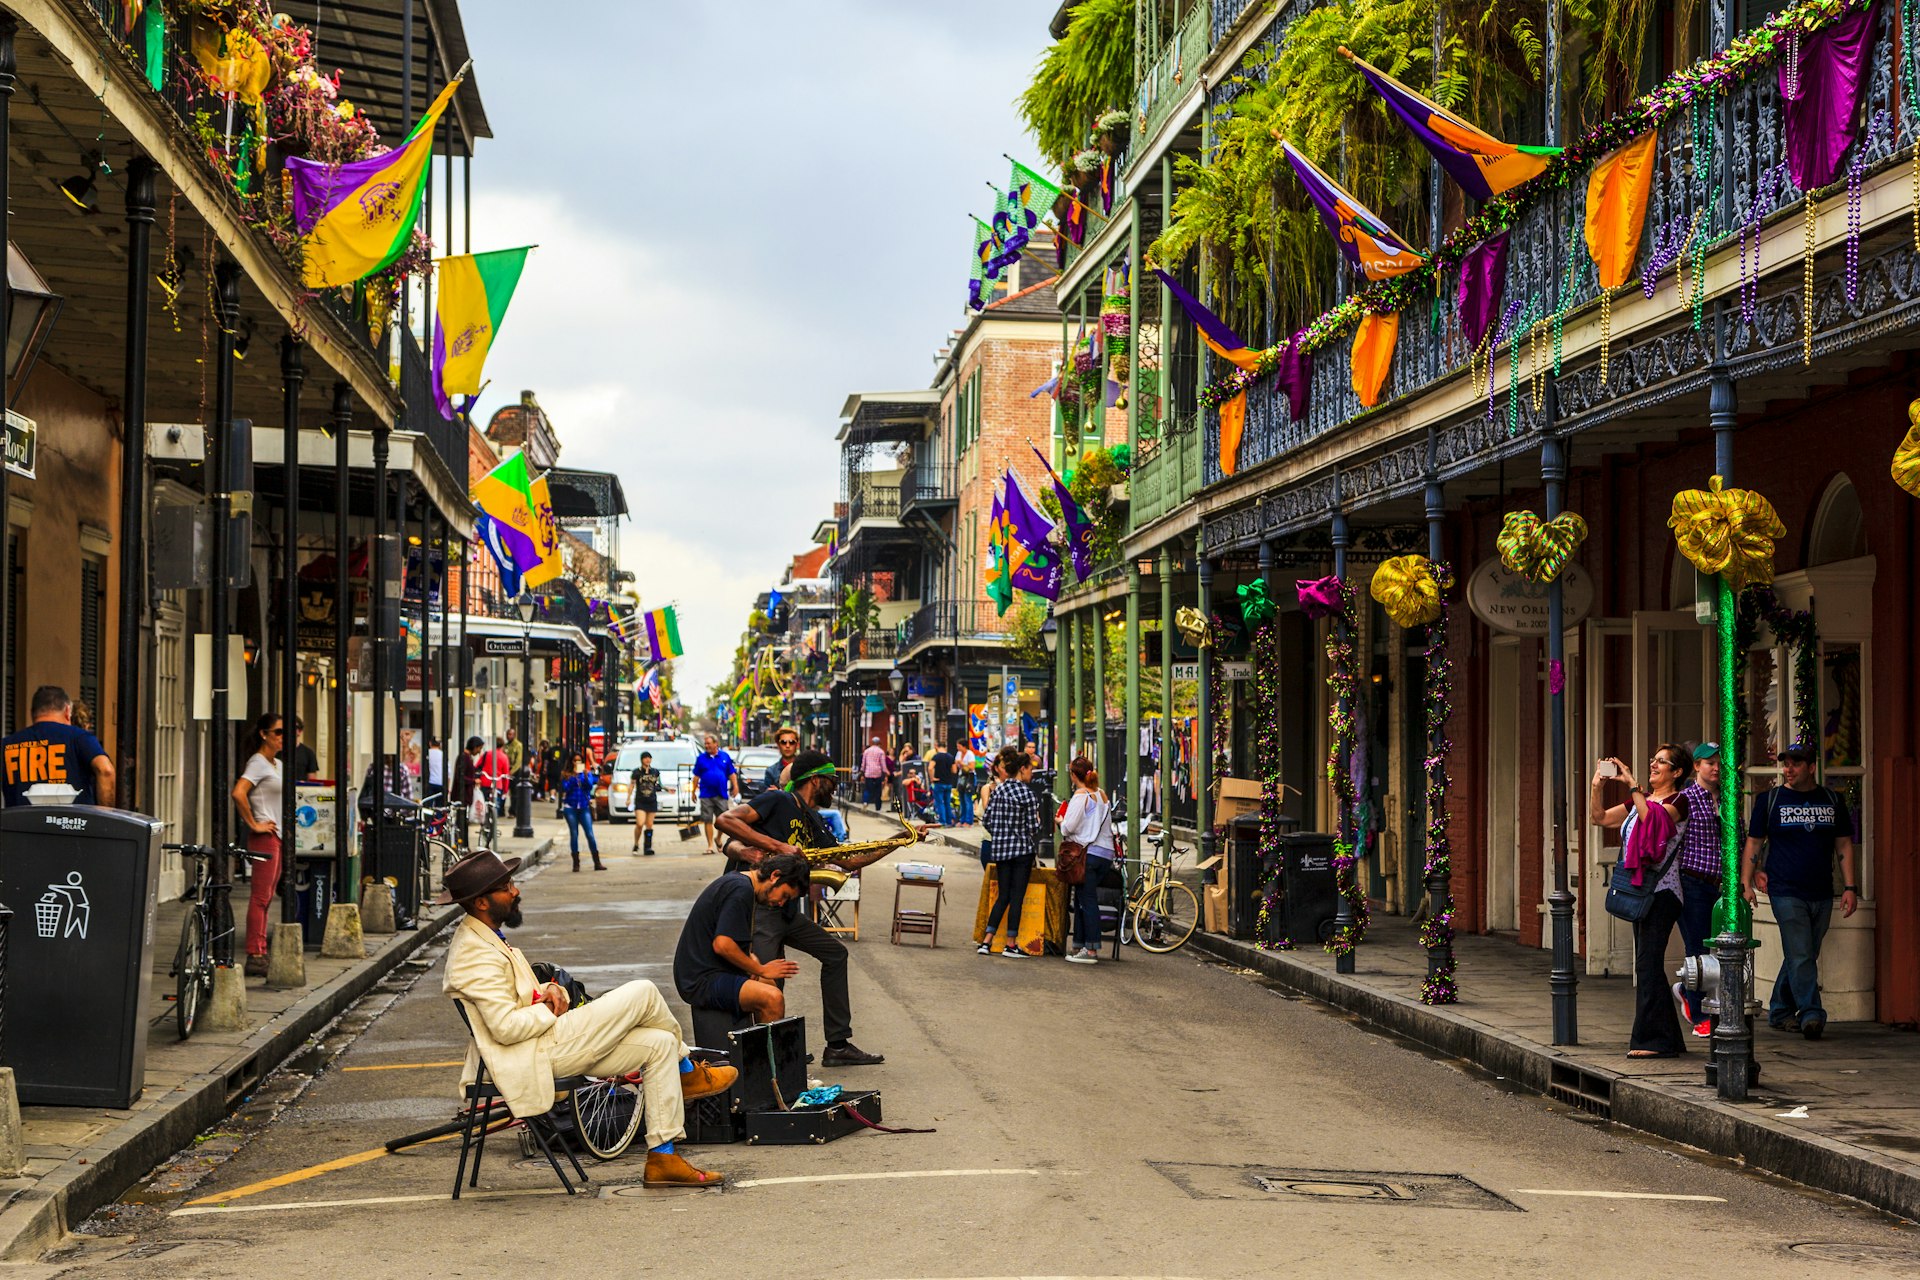 A local jazz band performs on the street in the New Orleans French Quarter